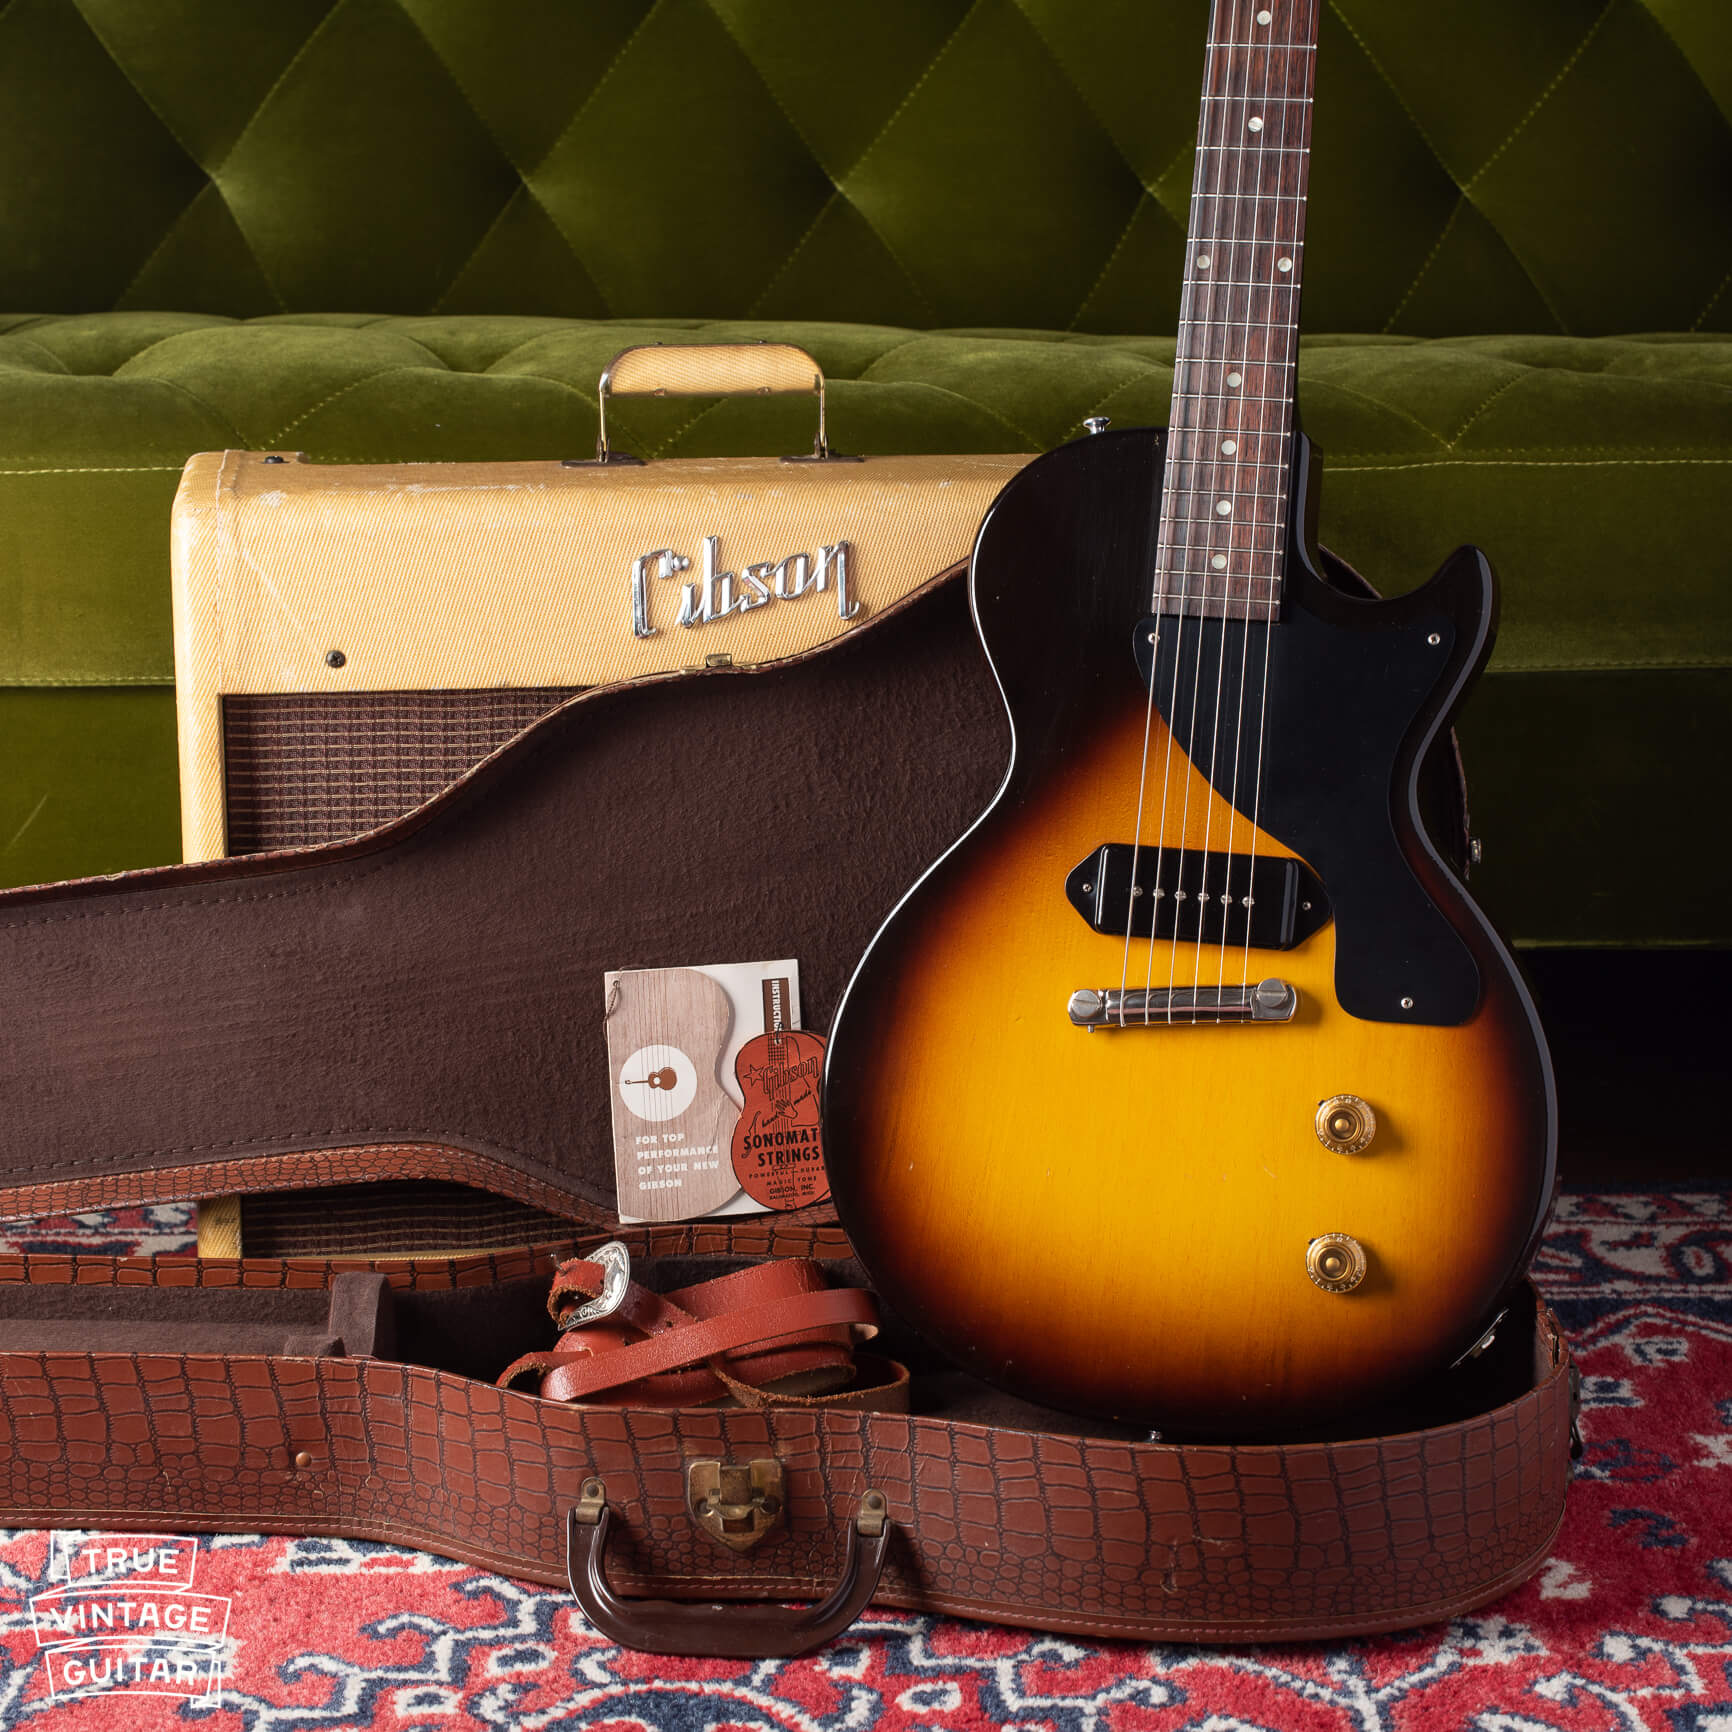 1959 Gibson Les Paul guitar with matching amplifier